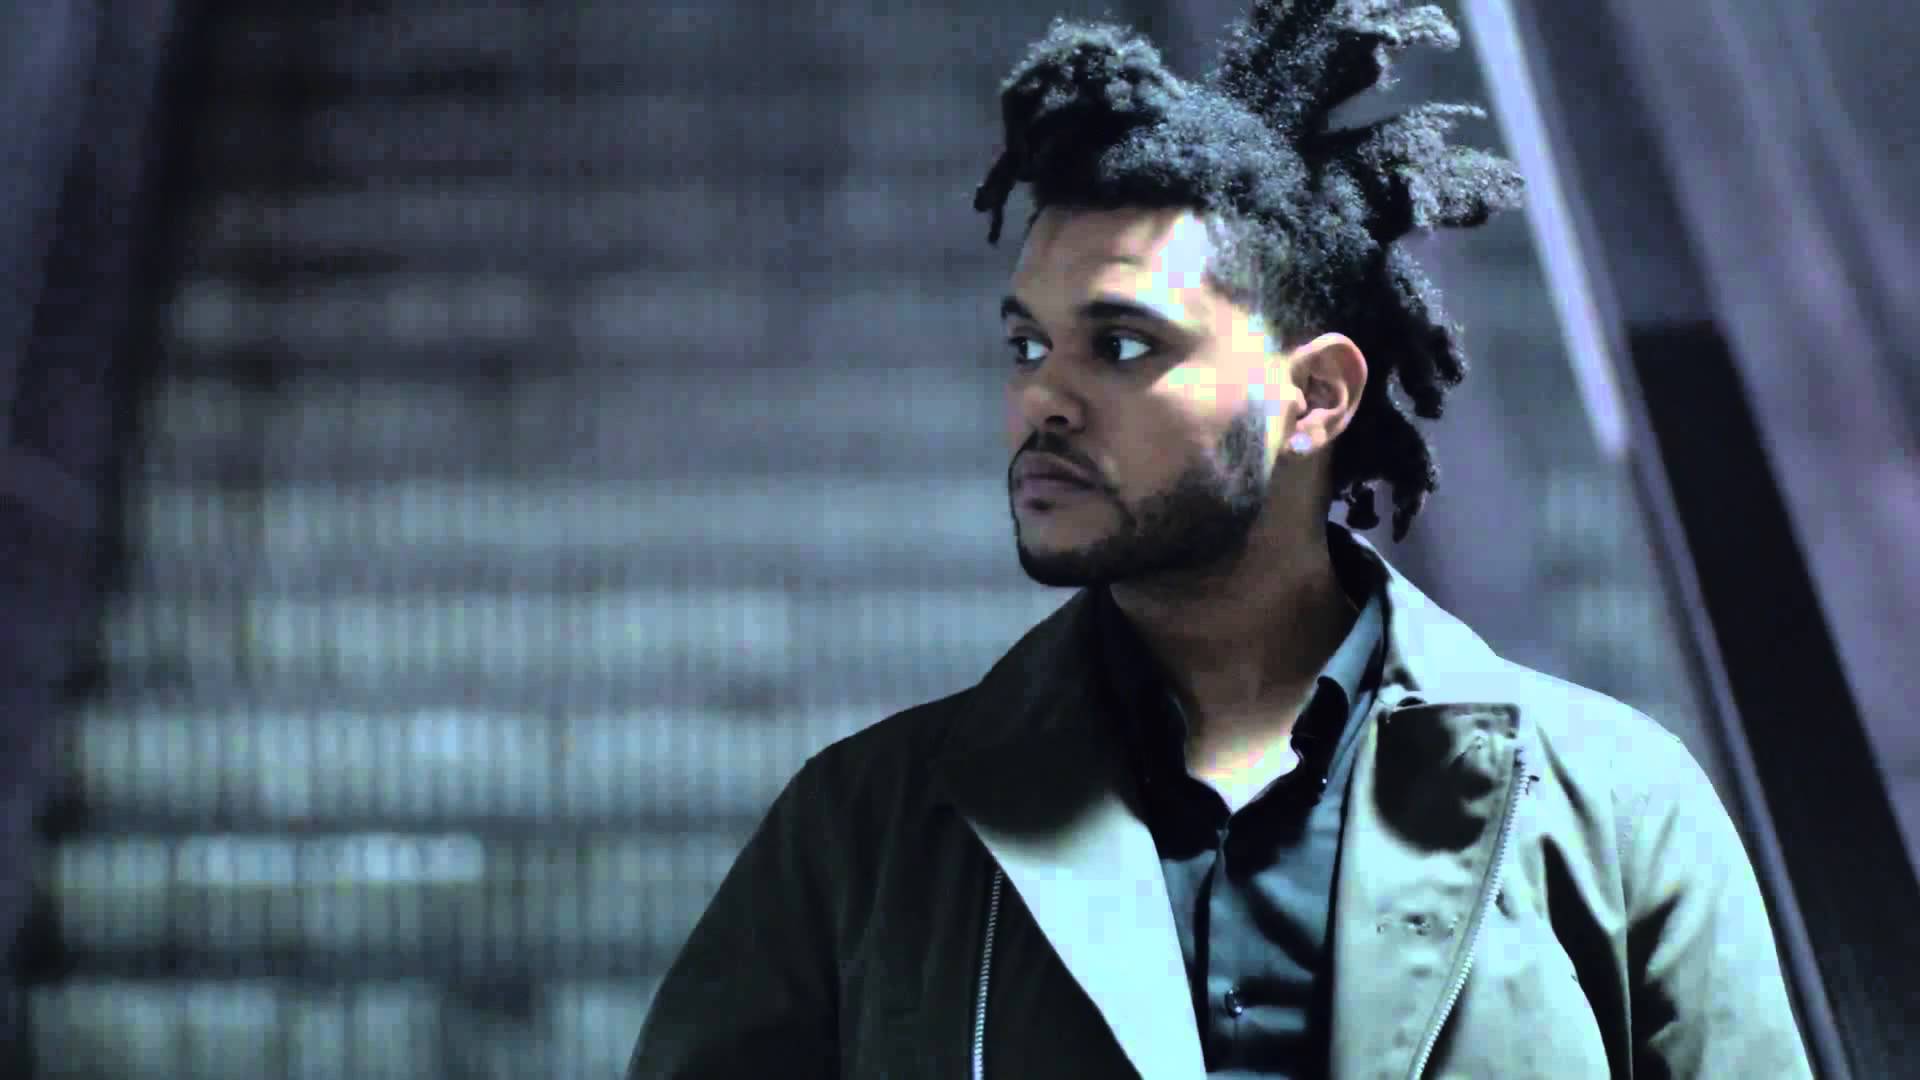 the weeknd Beauty Behind The Madness album preview review